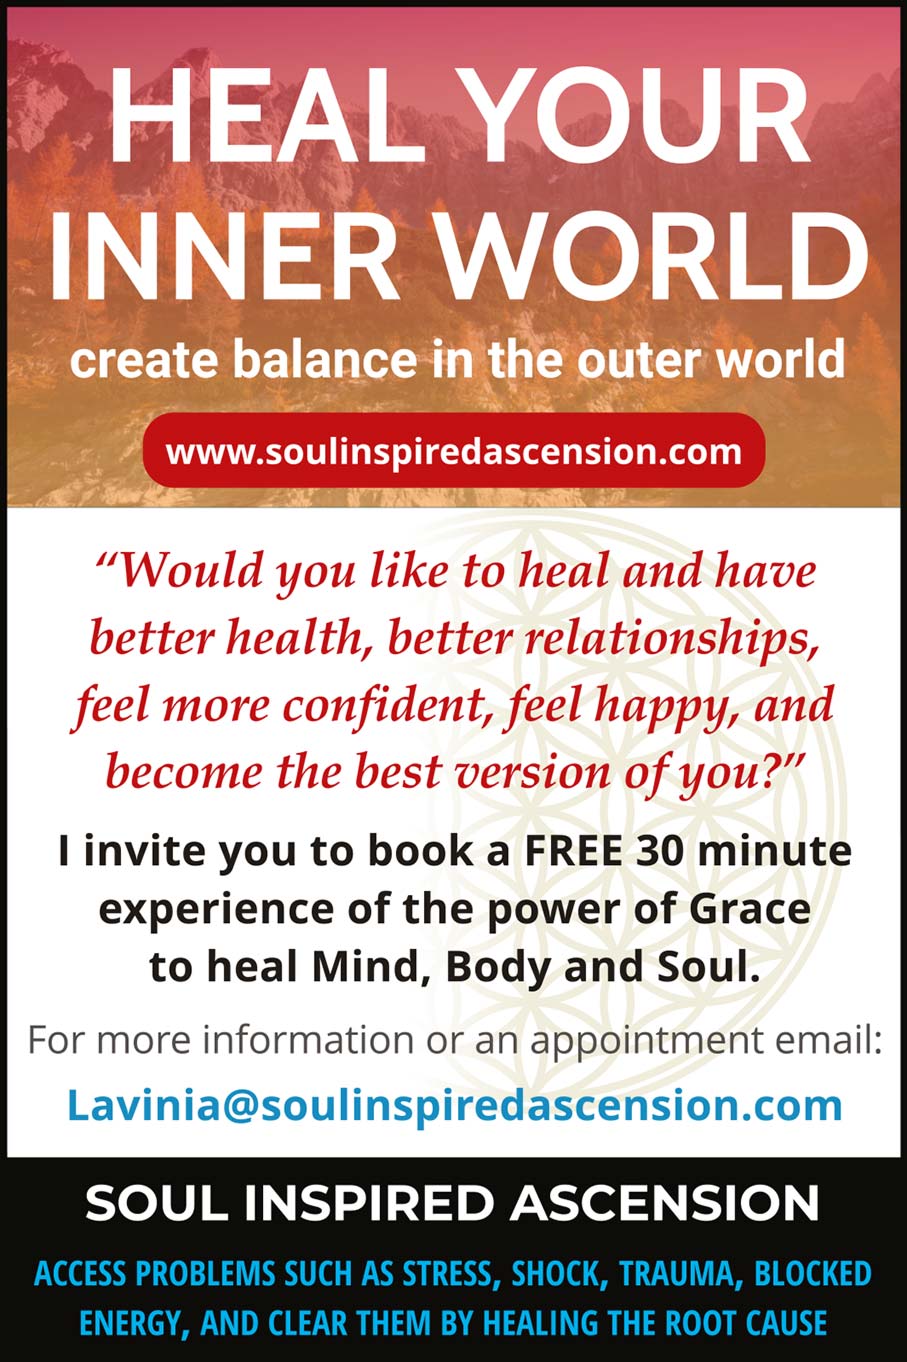 HEAL YOUR INNER WORLD  create balance in the outer world   "Would you like to heal and have better health, better relationships, feel more confident, feel happy, and become the best version of you?"  I invite you to book a FREE 30 minute experience with the power of grace to heal Mind, Body and Soul.   For more information or to book an appointment email: Lavinia@soulinspiredascension.com  ACCESS PROBLEMS SUCH AS STRESS, SHOCK, TRAUMA, BLOCKED ENERGY, SND CLEAR THEM BY HEALING THE ROOT CAUSE 